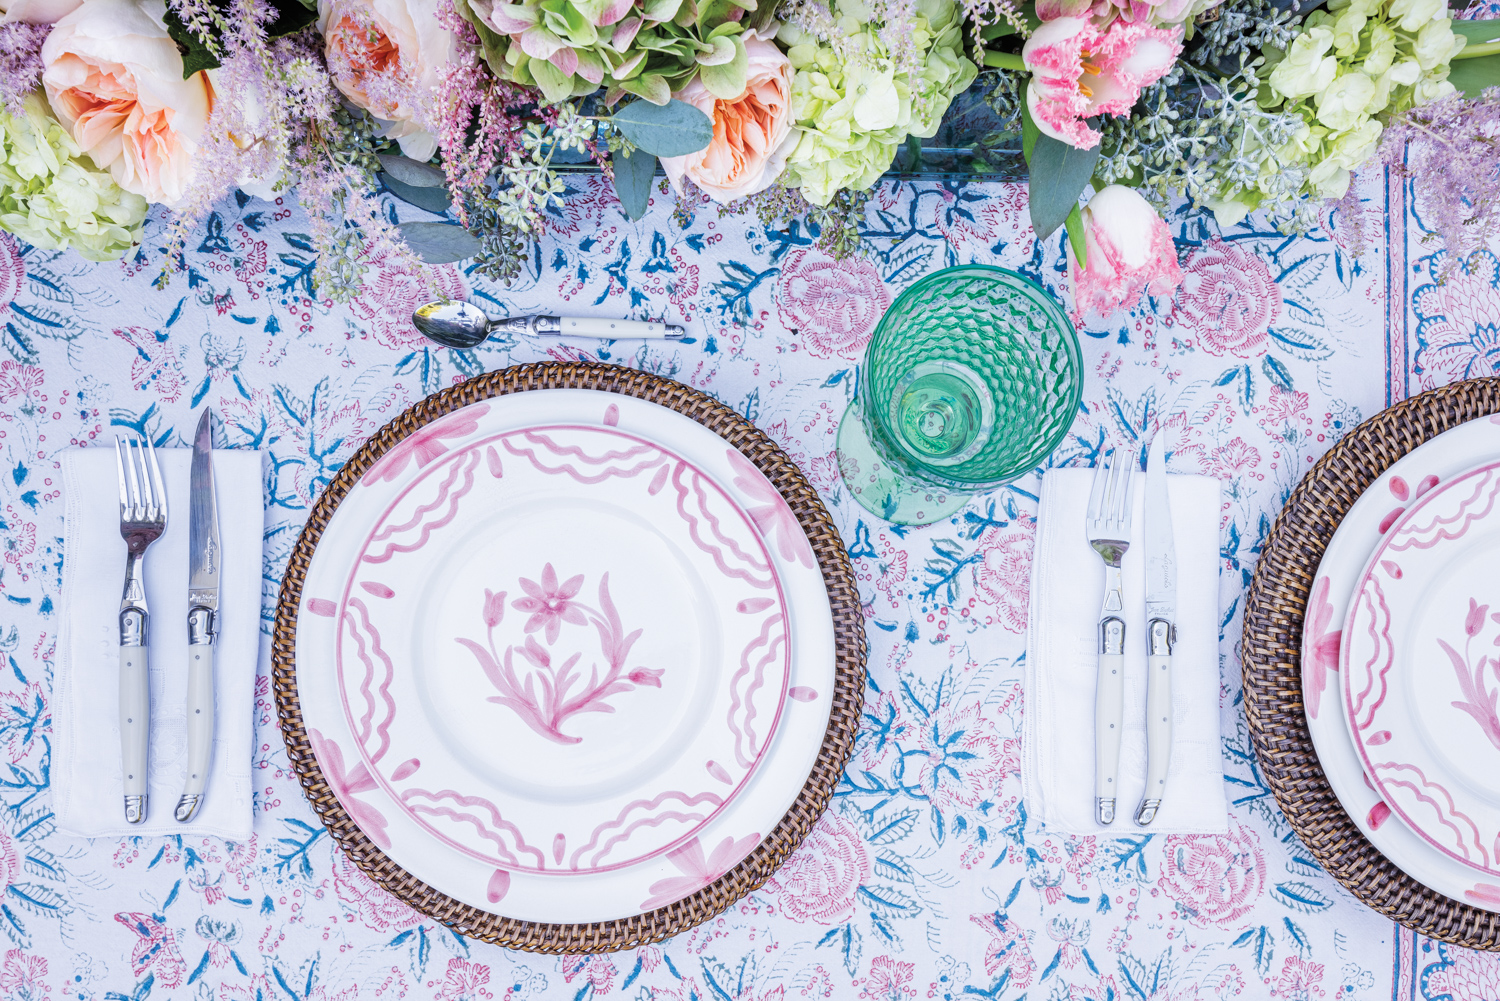 designer Constanza Collarte outdoor table set with pink plates, florals tablecloth and green glasses